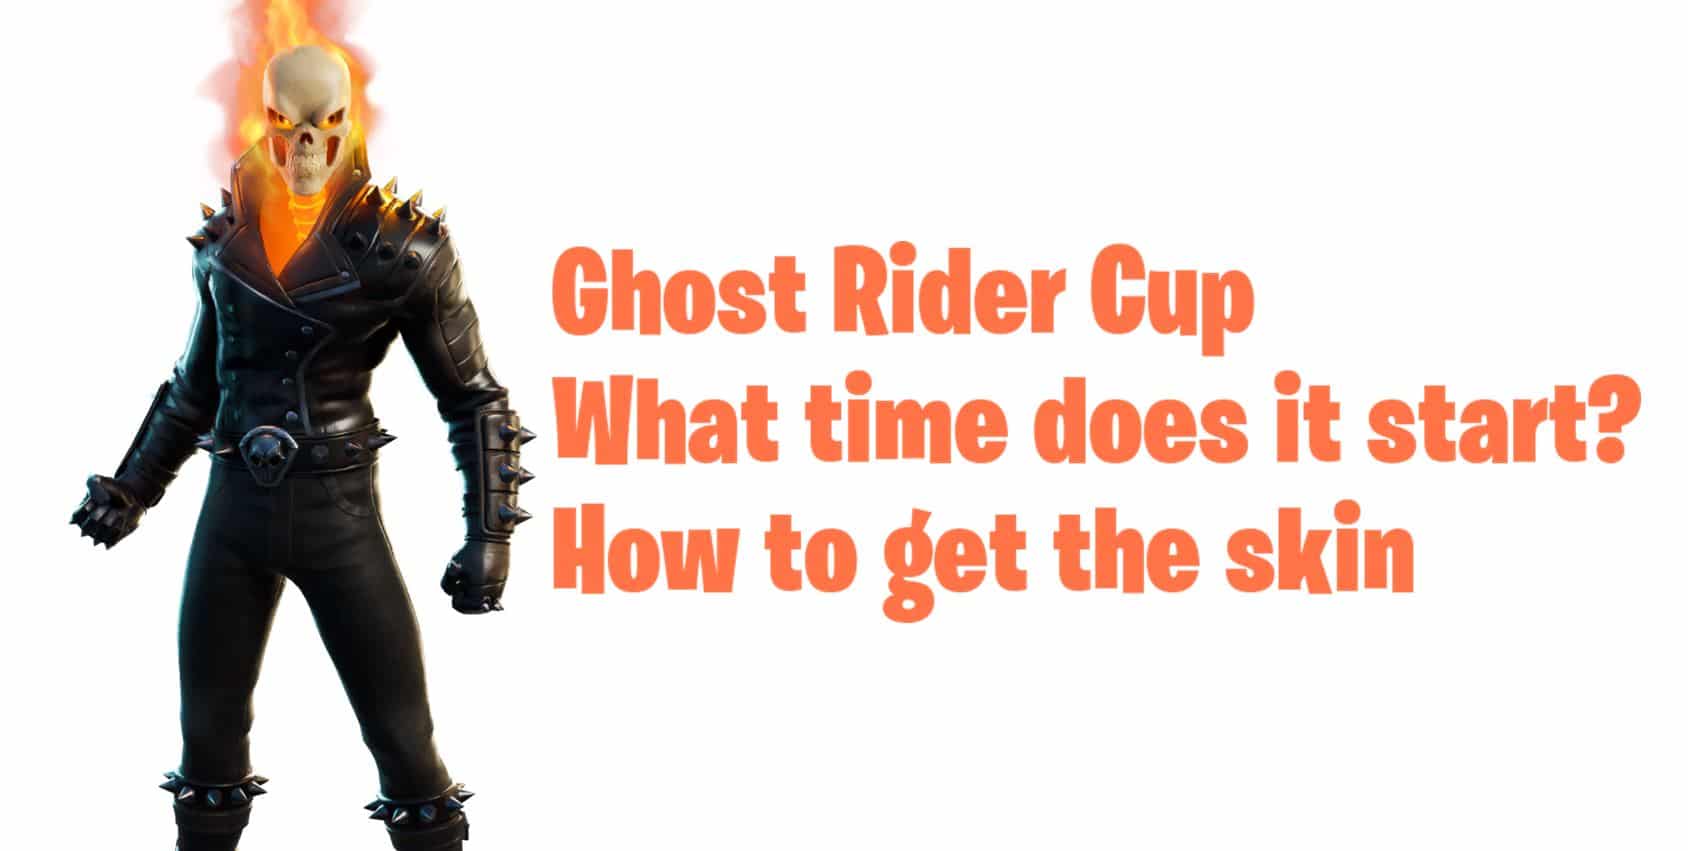 Ghost Rider Cup How to get the skin in Fortnite